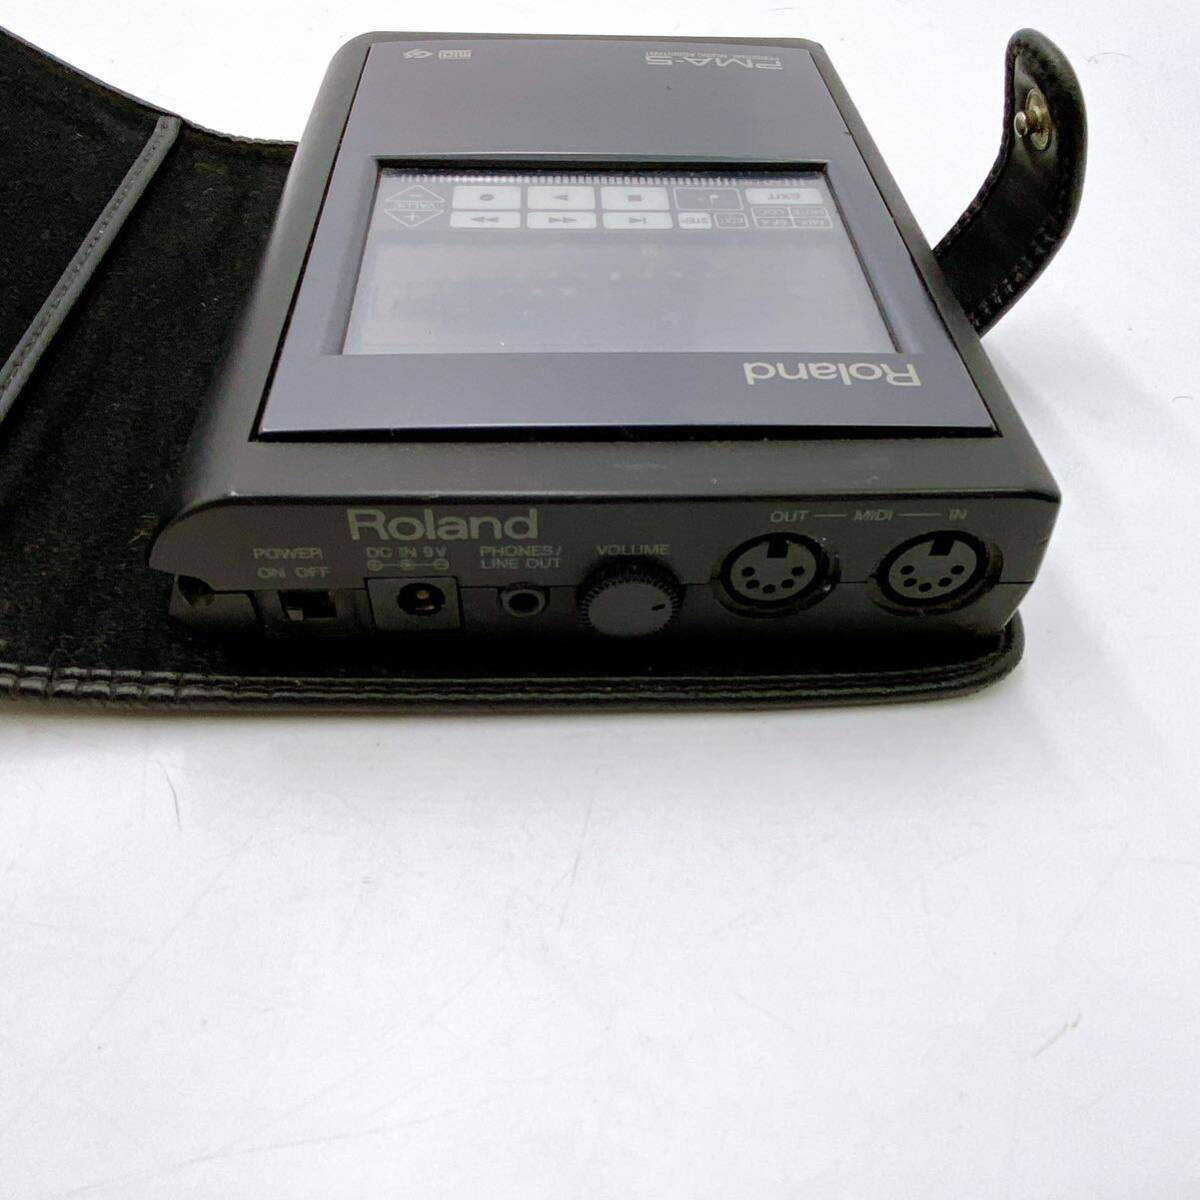  Roland PMA-5 portable sequencer Roland PERSONAL MUSIC ASSISTANT Junk 